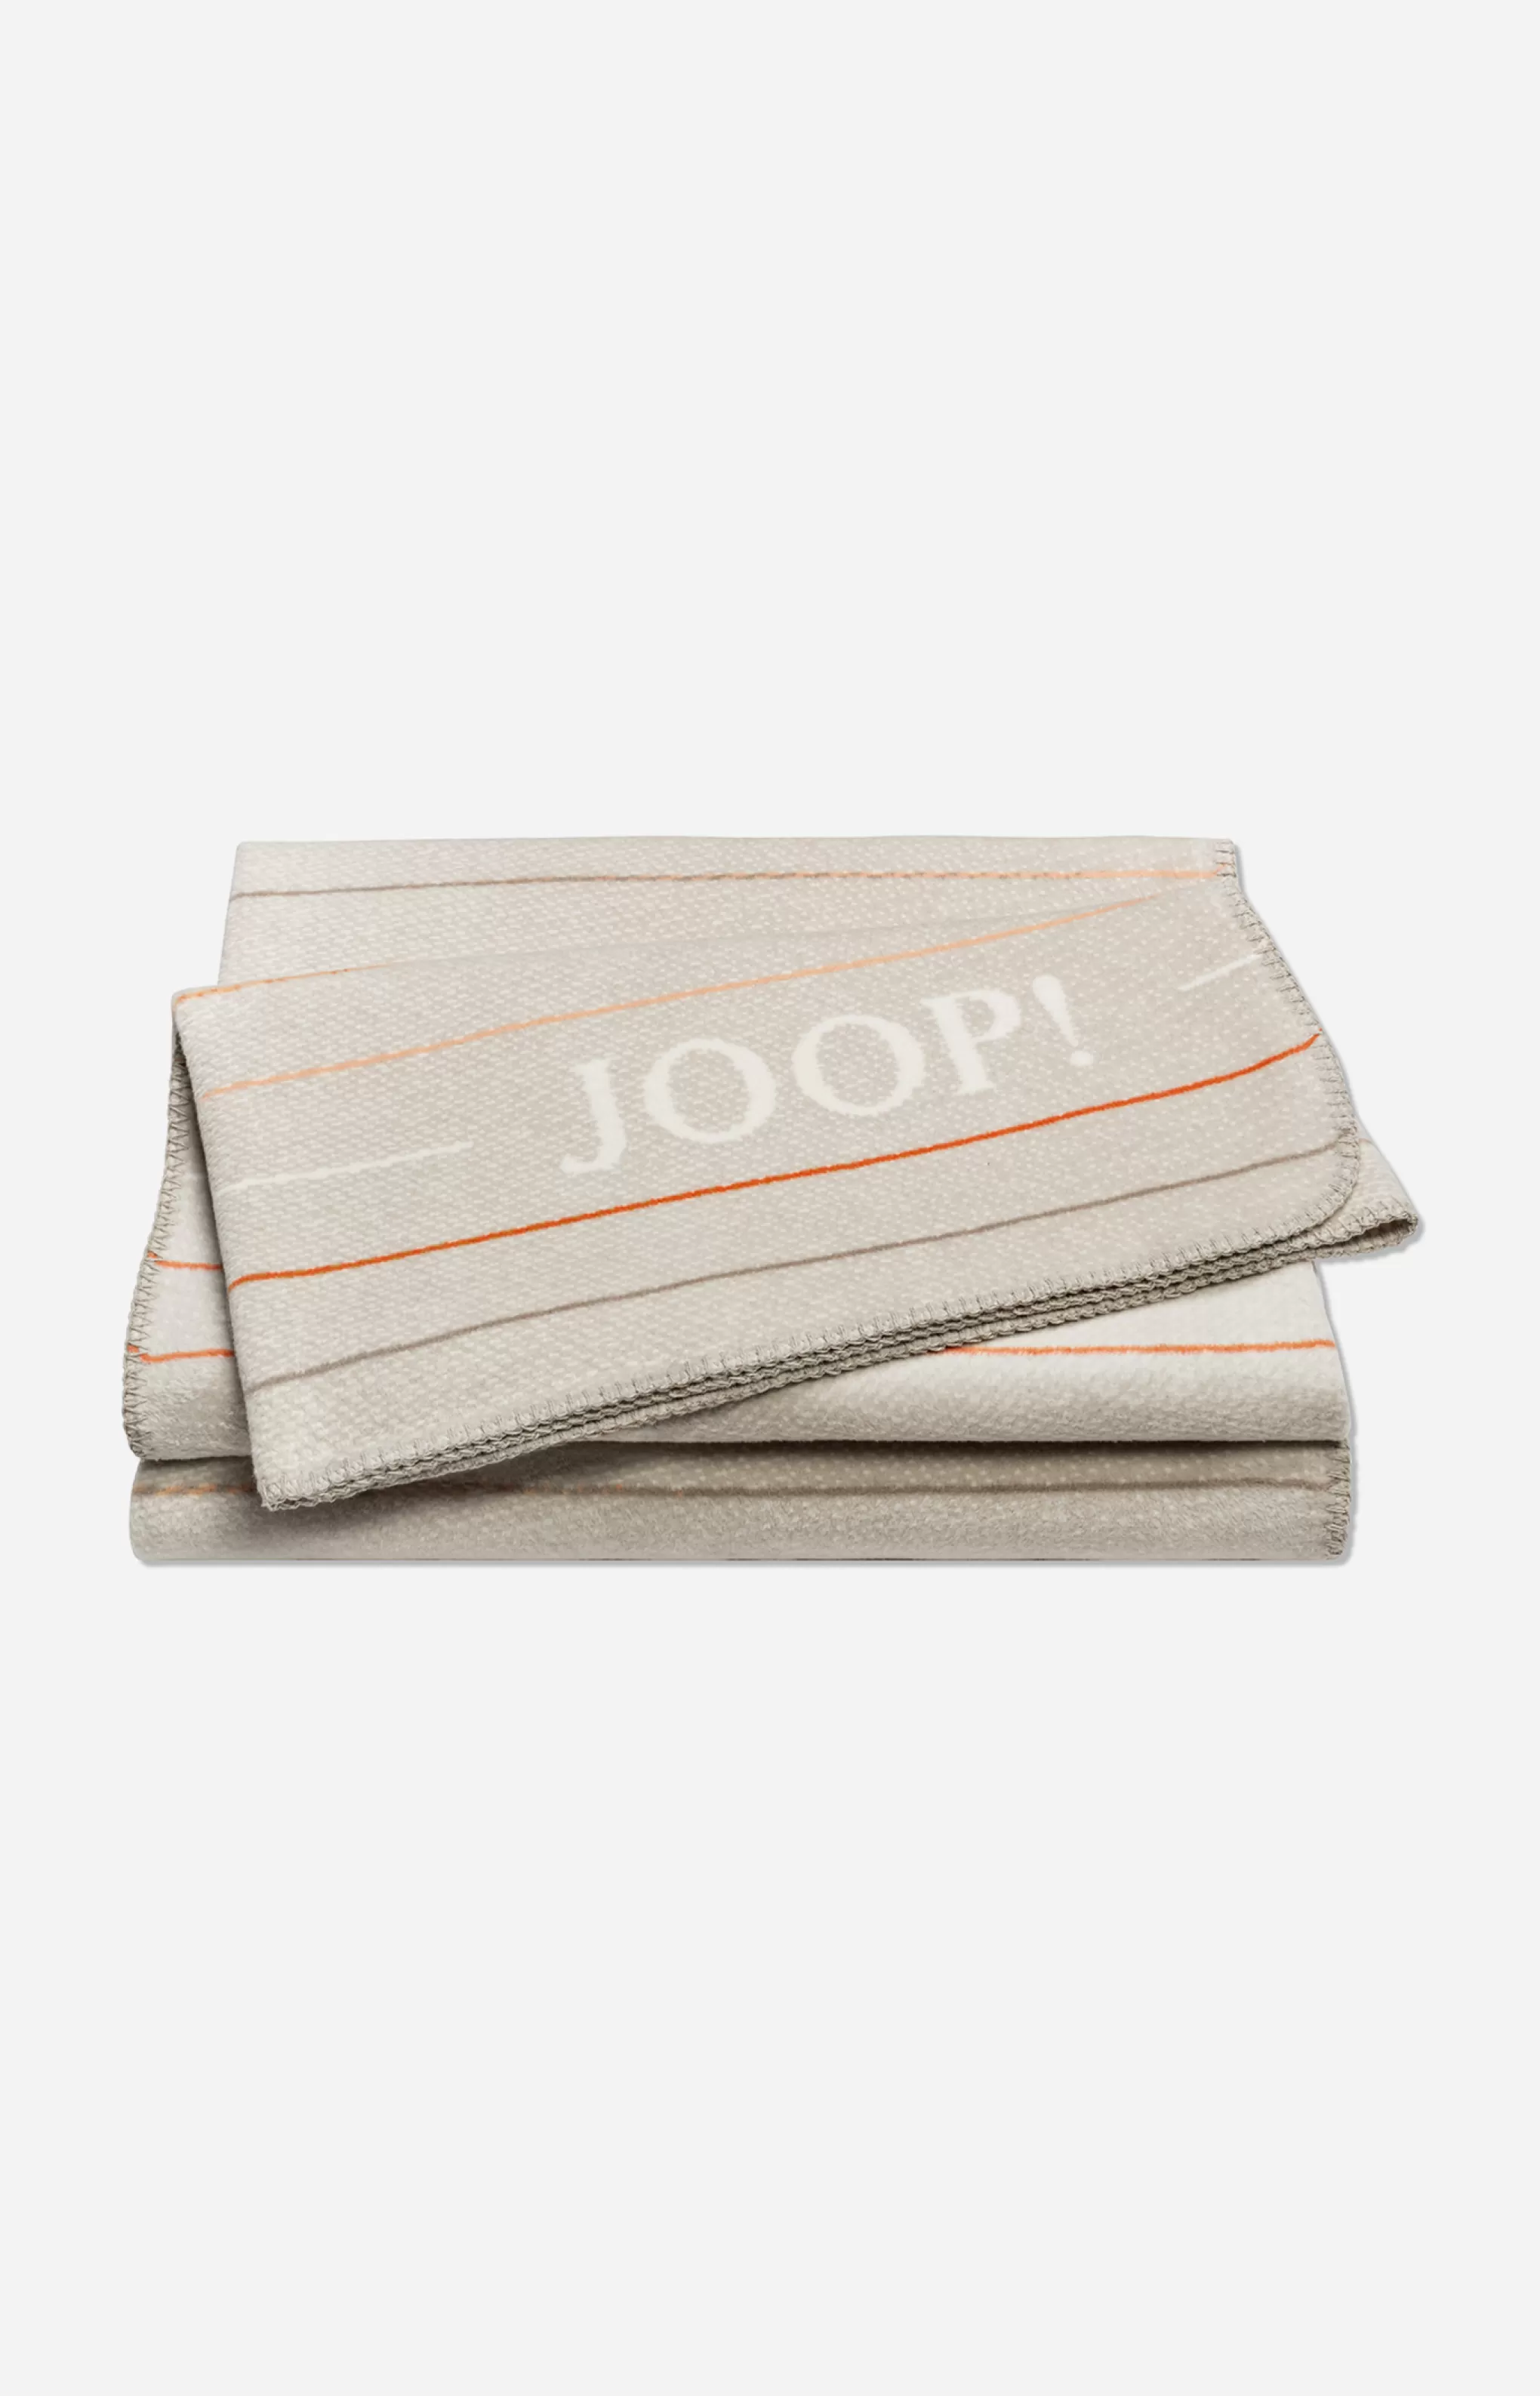 Throws & Blankets | Discover Everything*JOOP Throws & Blankets | Discover Everything ! MOVE Throw in